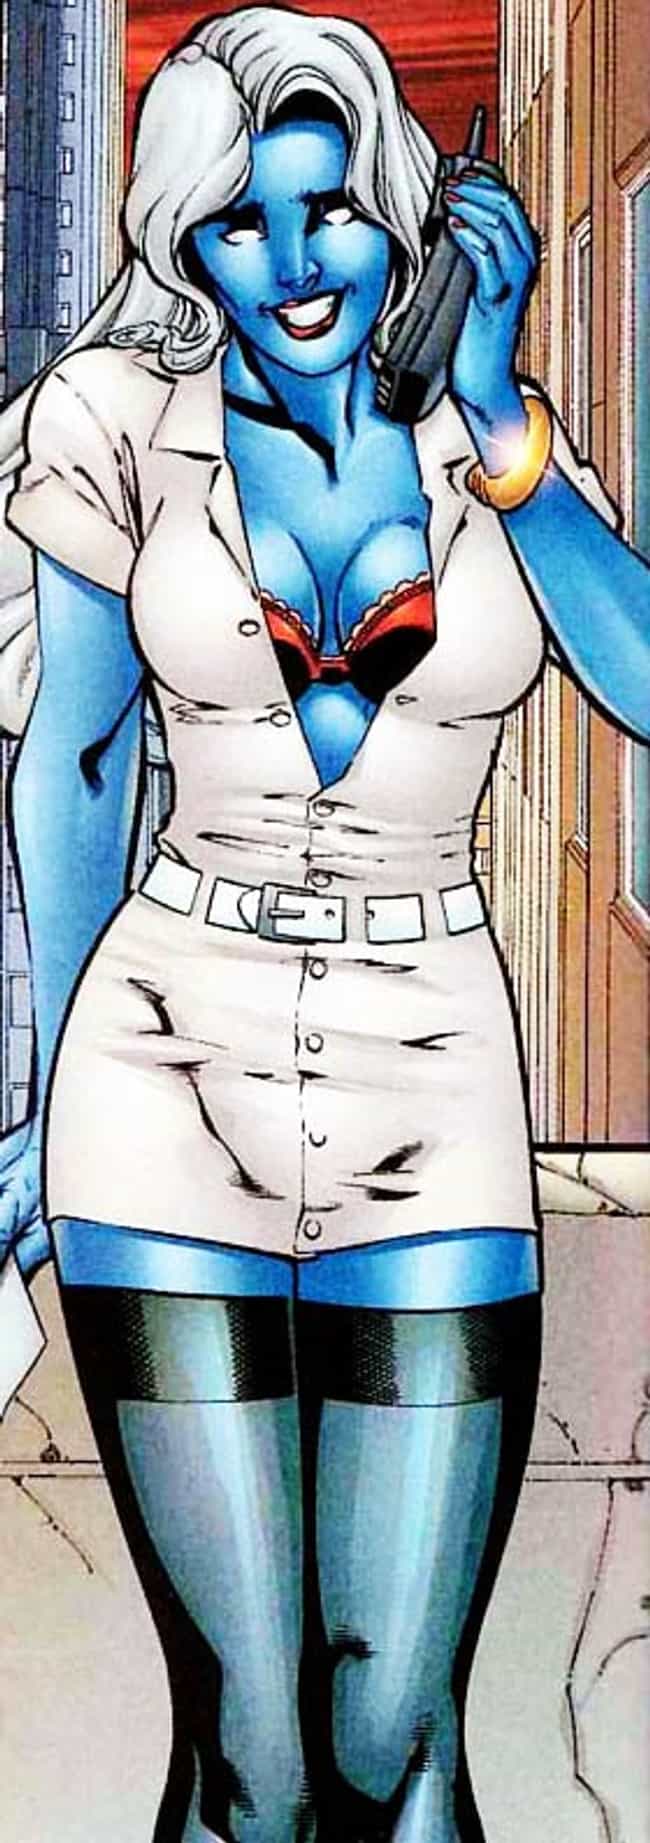 Sexiest Female Comic Book Characters List Of The Hottest Women In Comics Page 26